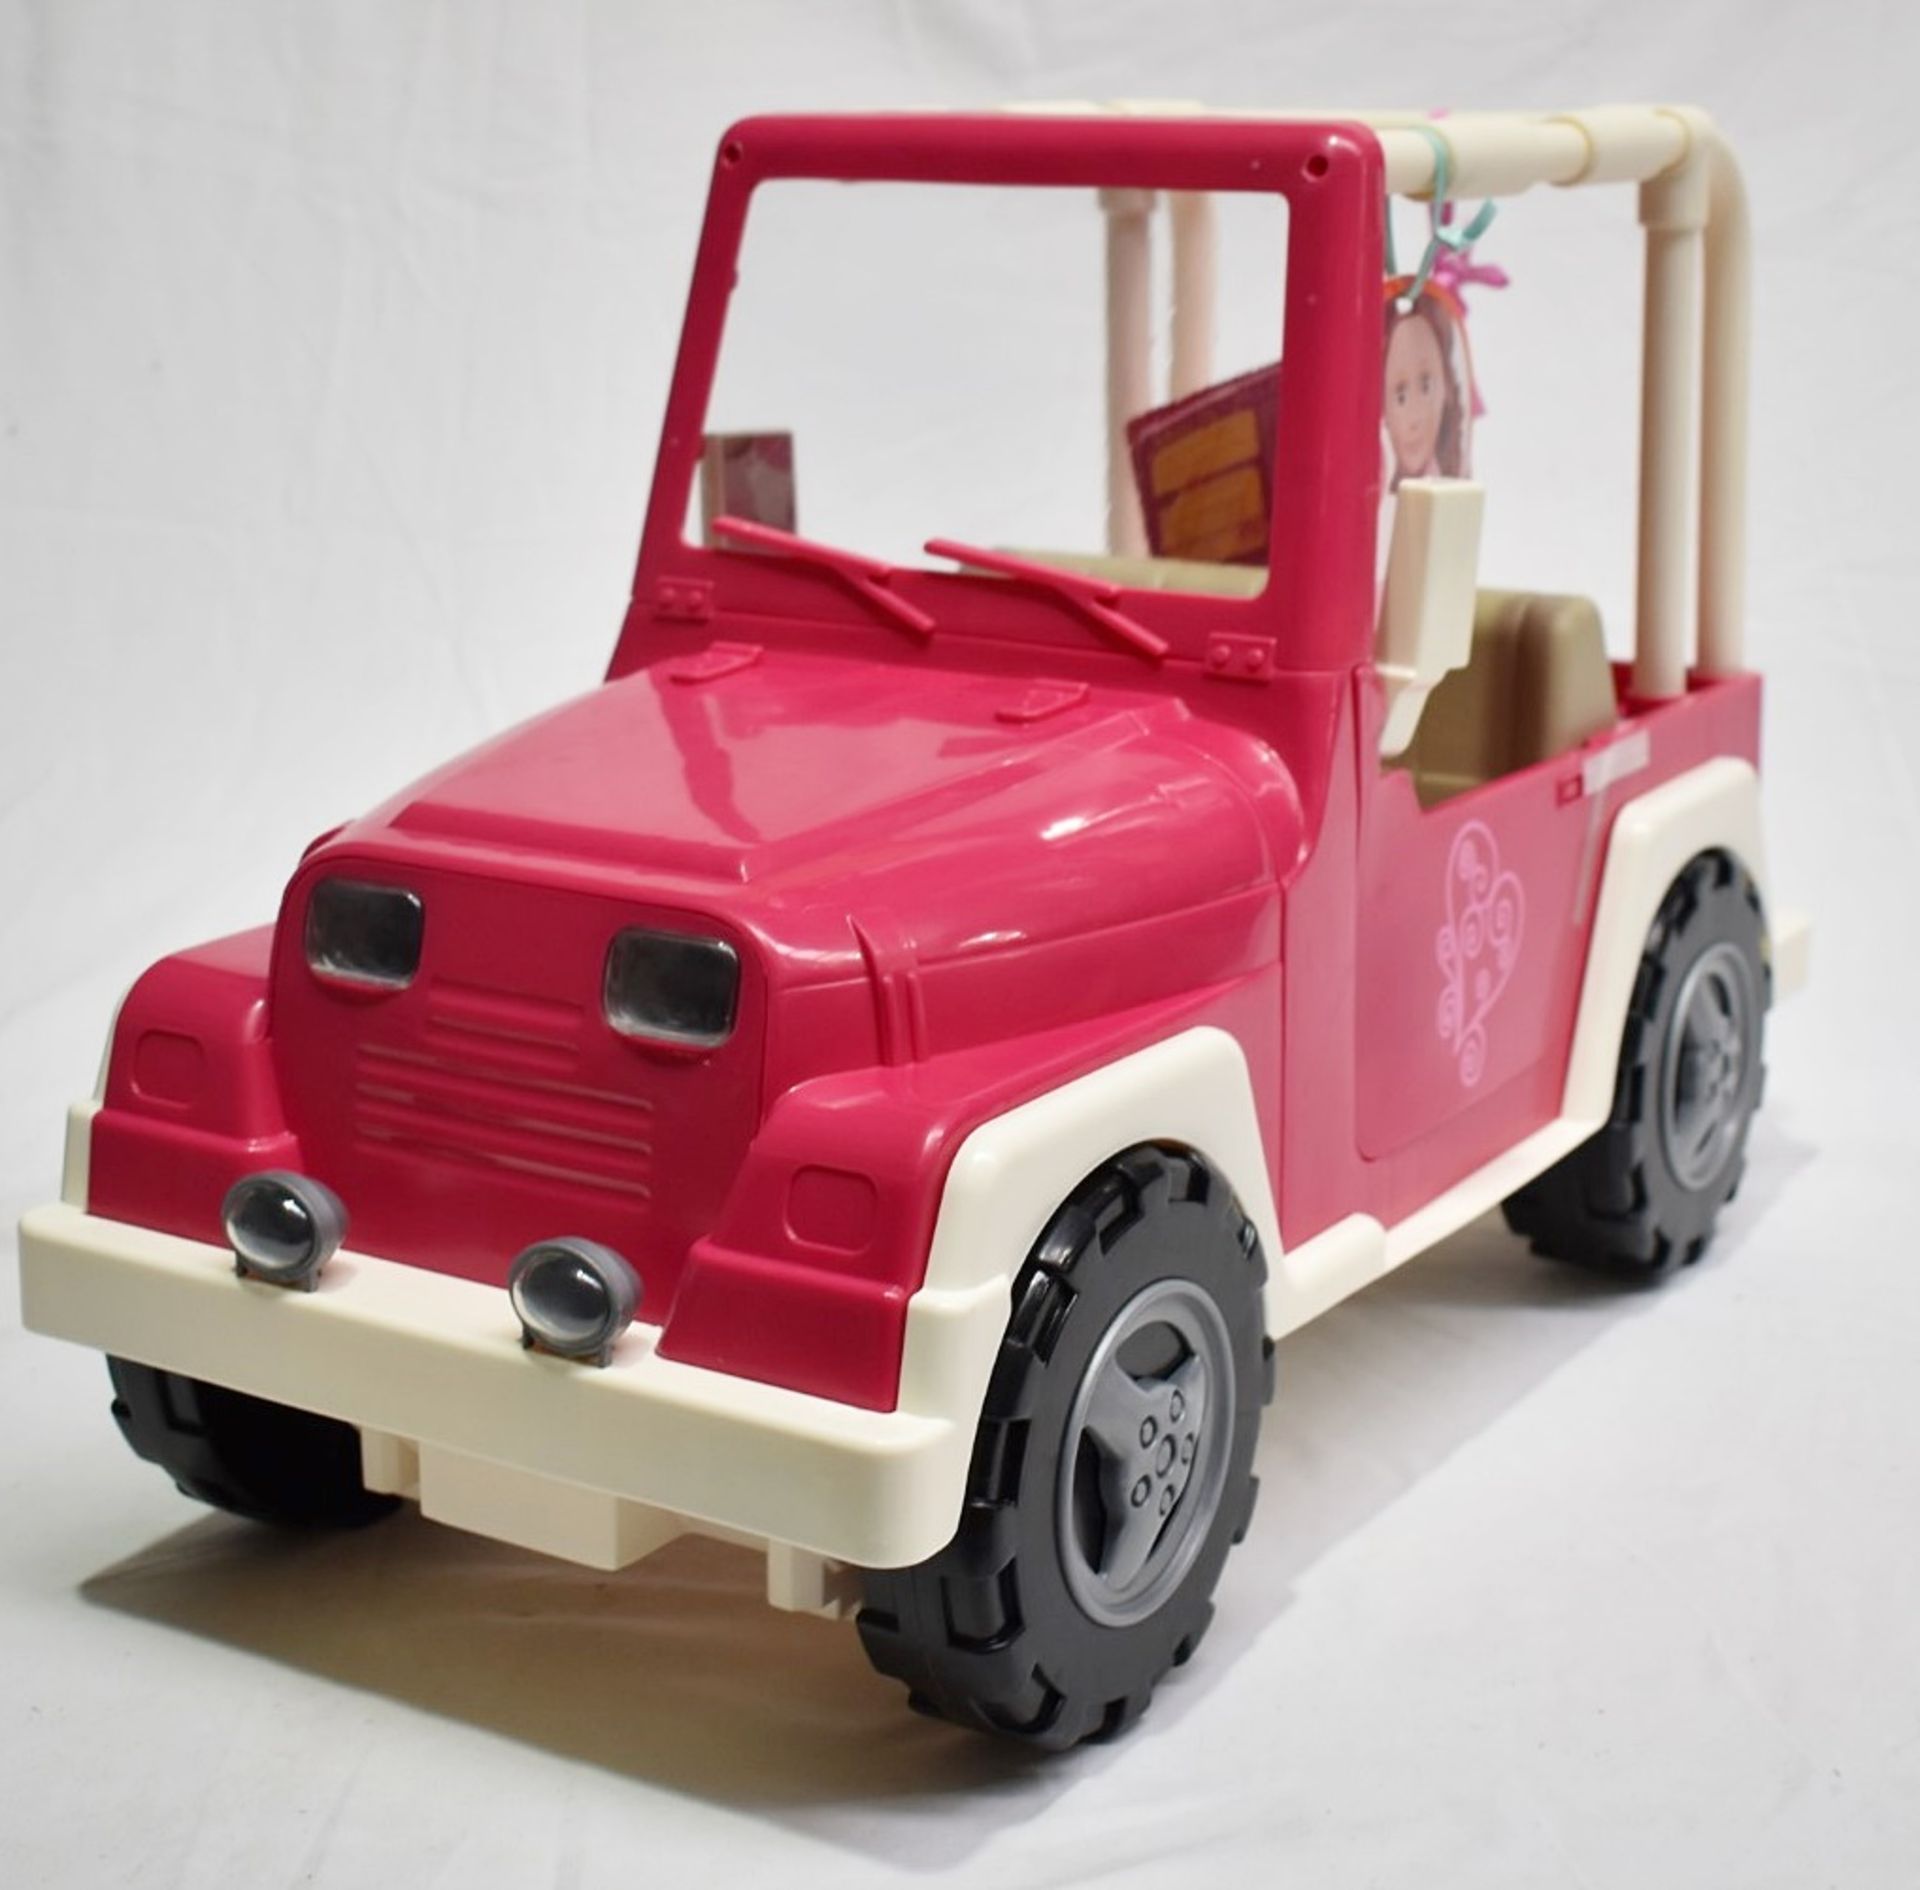 1 x OUR GENERATION 4x4 Off Roader Toy with Built-in Bluetooth Speakers - Original Price £169.00 - Image 3 of 5